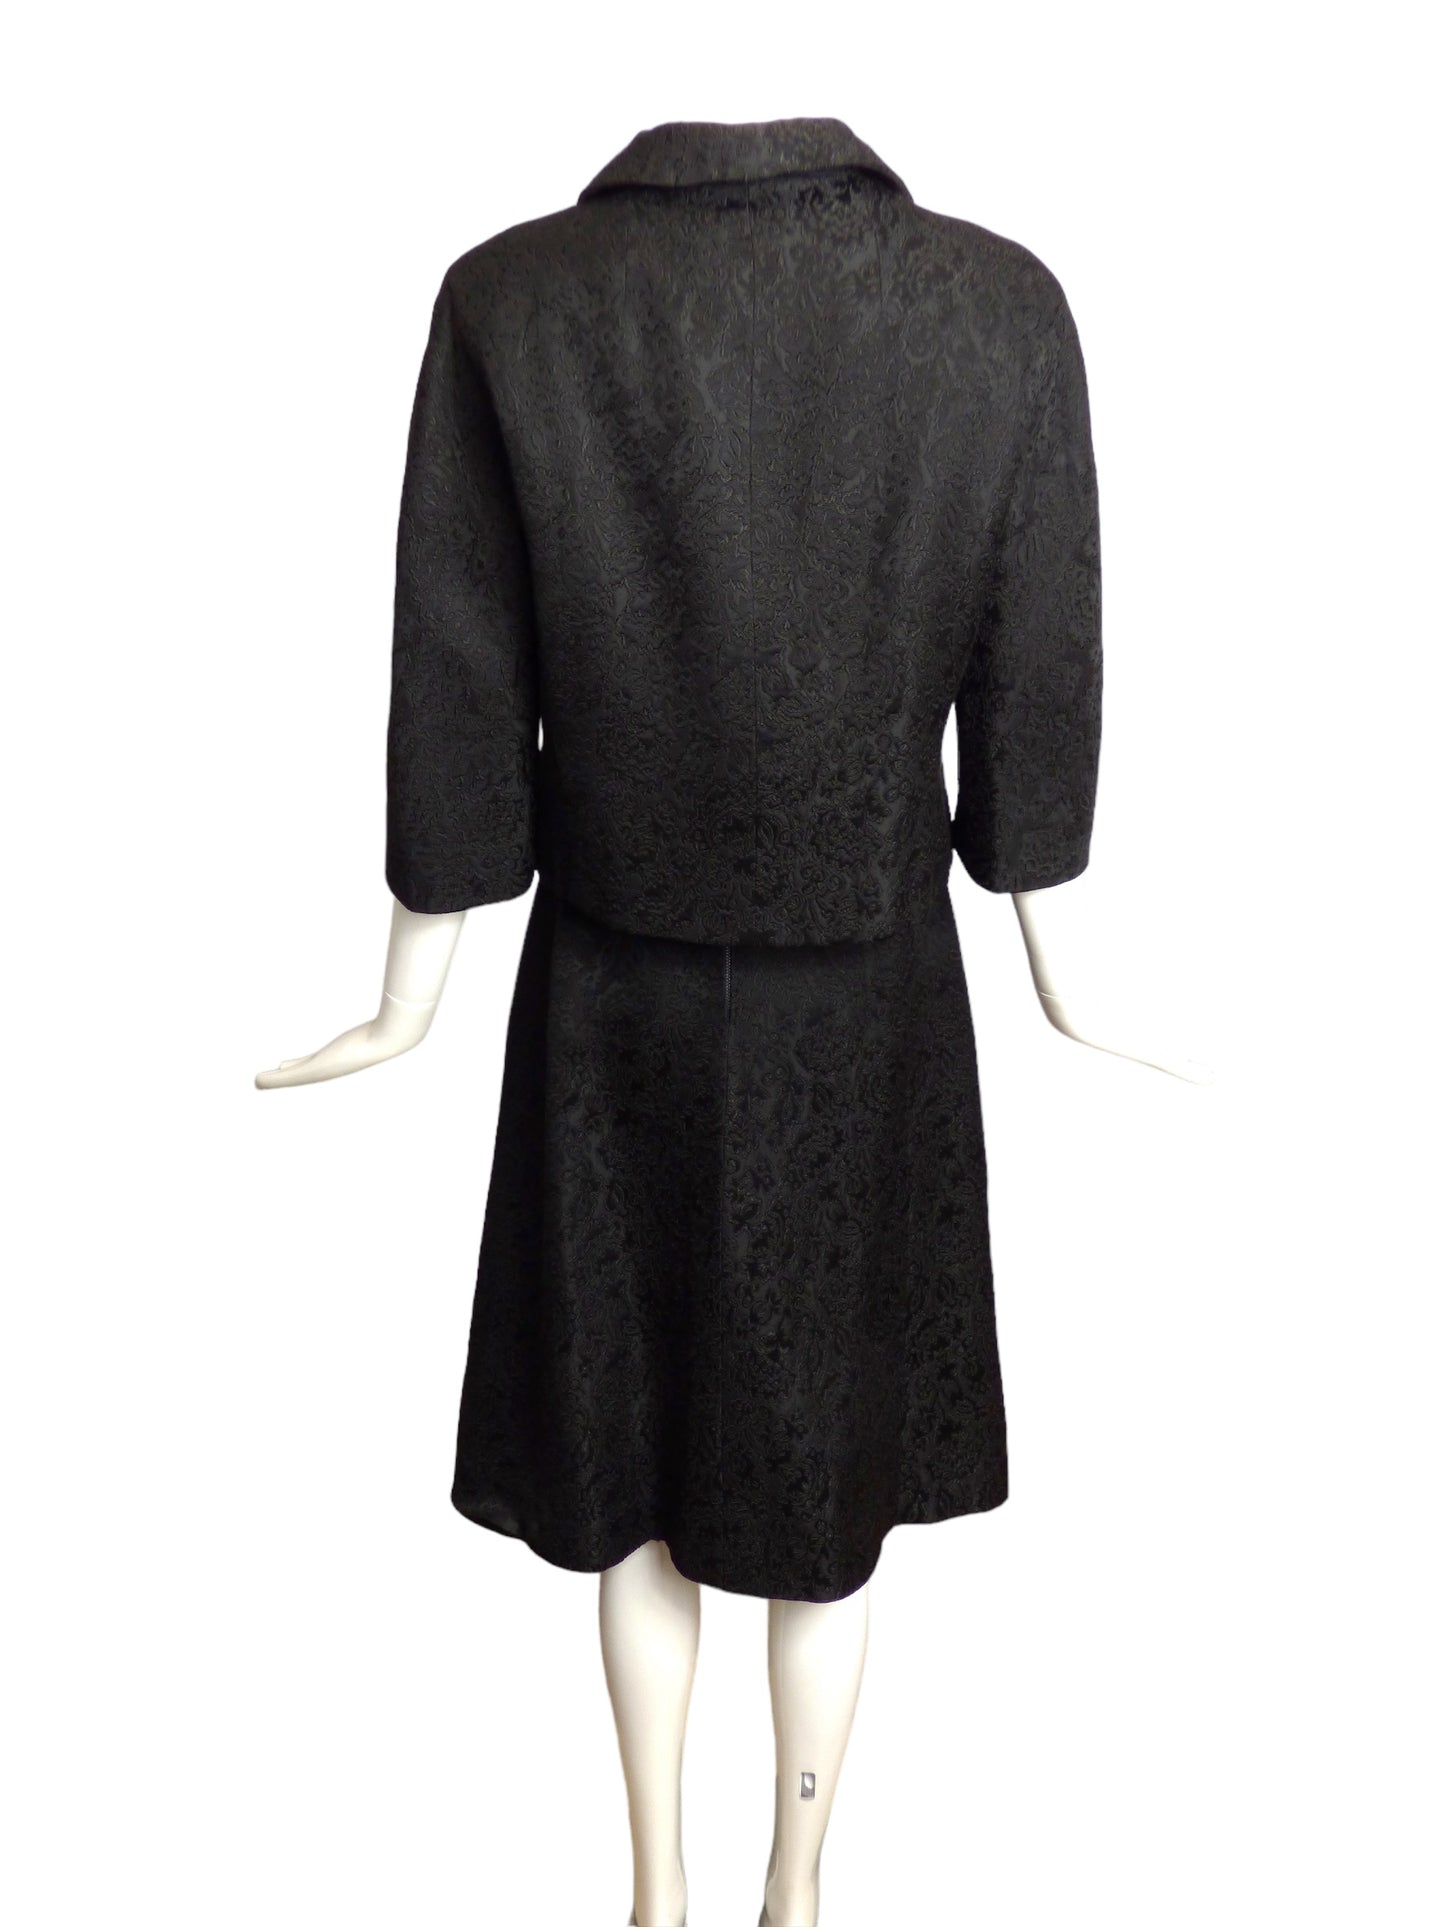 CHRISTIAN DIOR- 1950s 3pc Brocade Skirt Suit, Size 8